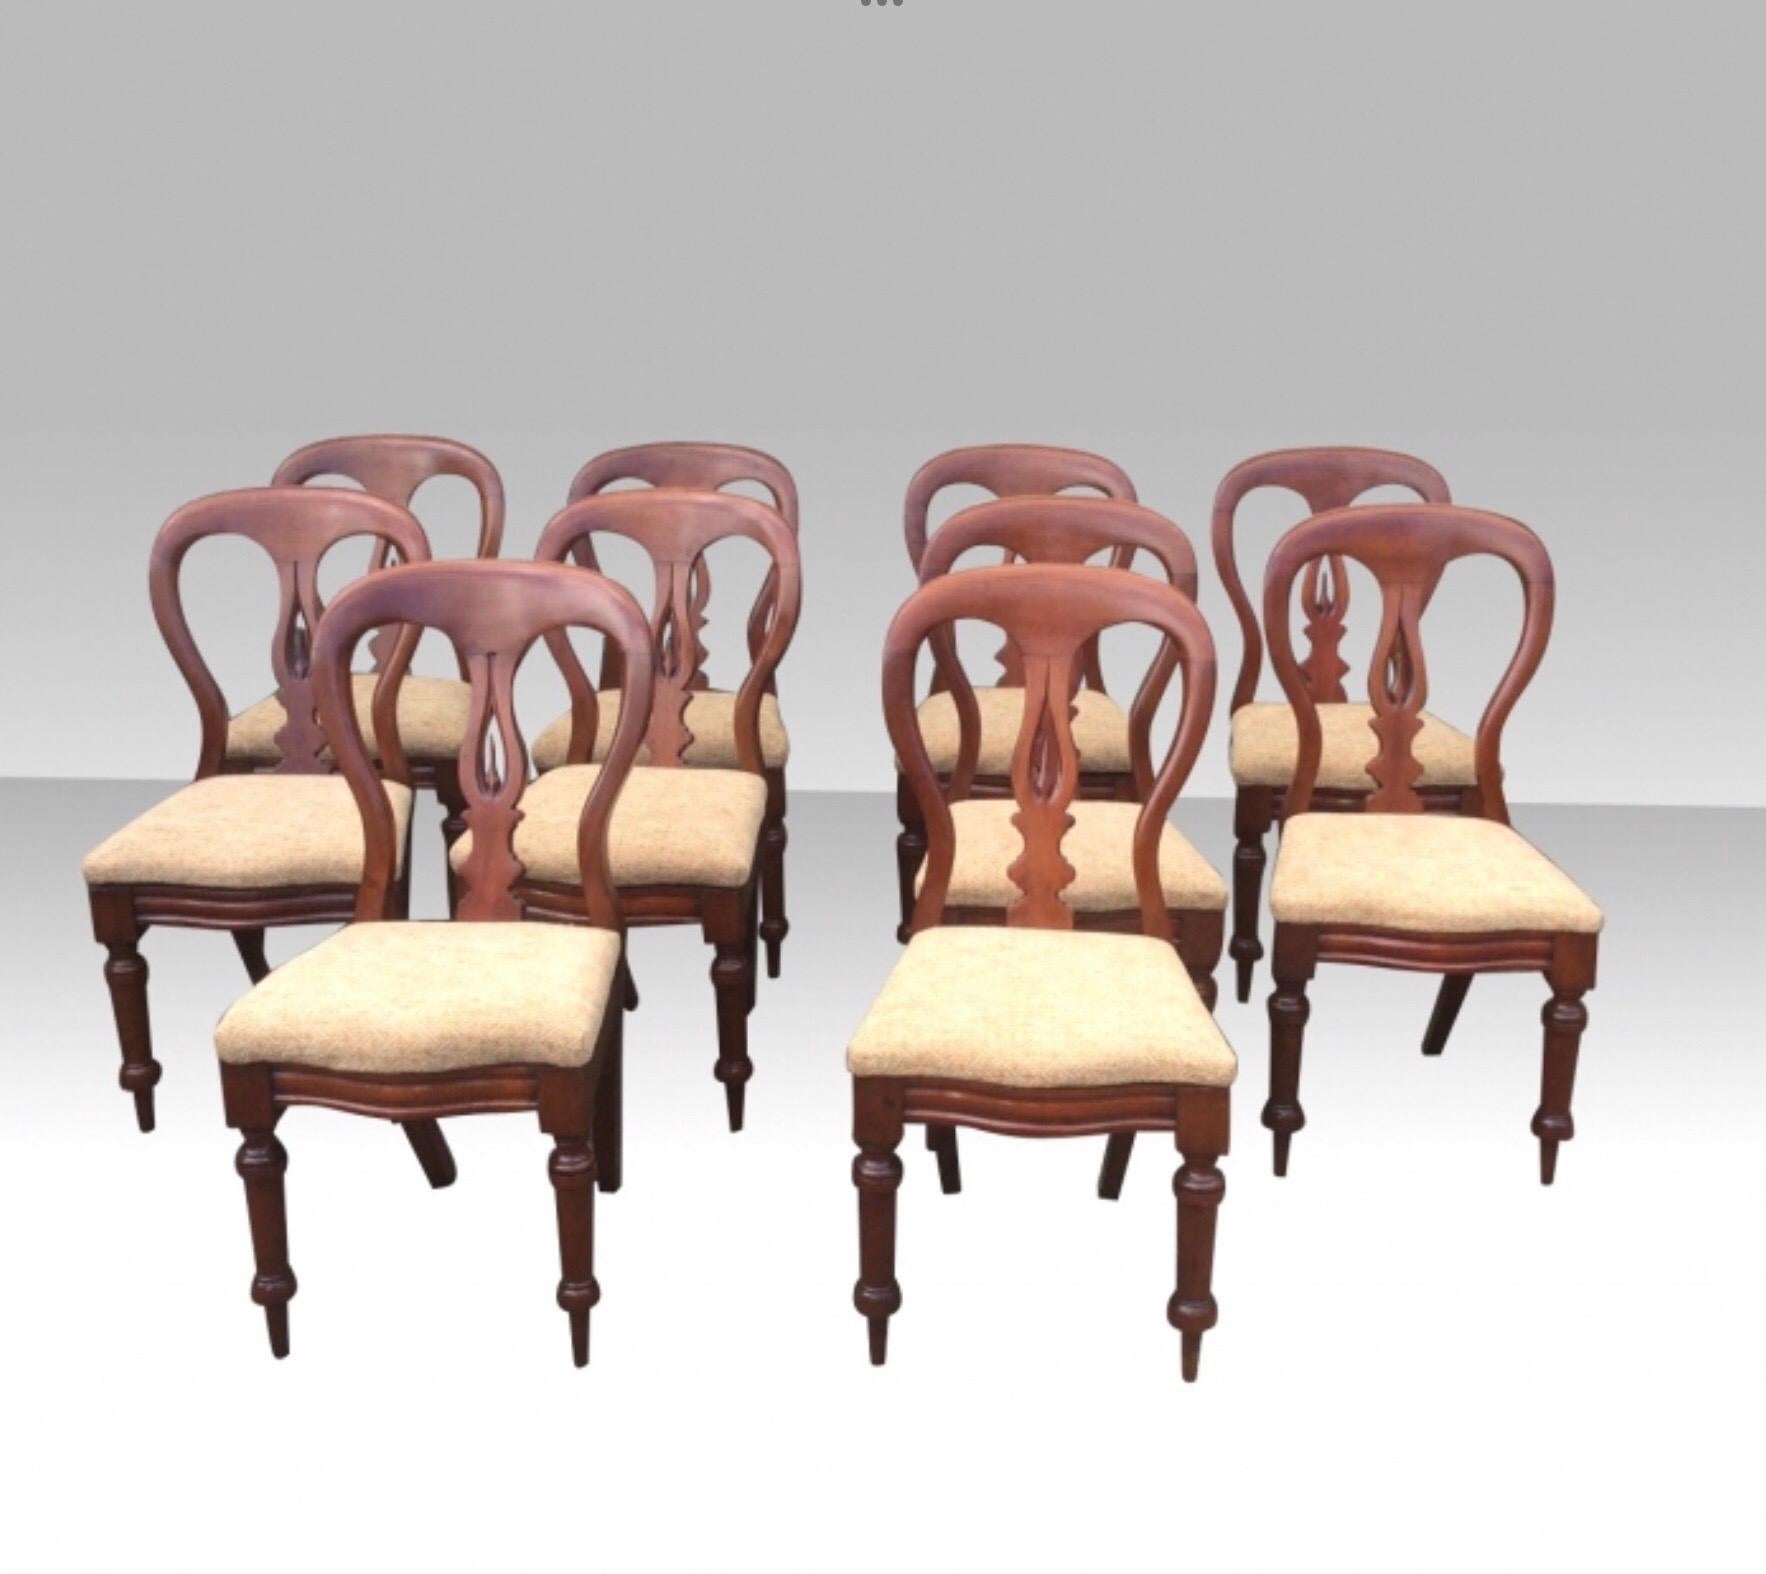 Superb Set Of Ten 10 Antique Mahogany dining chairs in great condition and tight of joint.
{Drop In Seats}

Measures: 35ins high x 17ins wide x 21ins deep

Seat Height 18ins.

Circa 1870